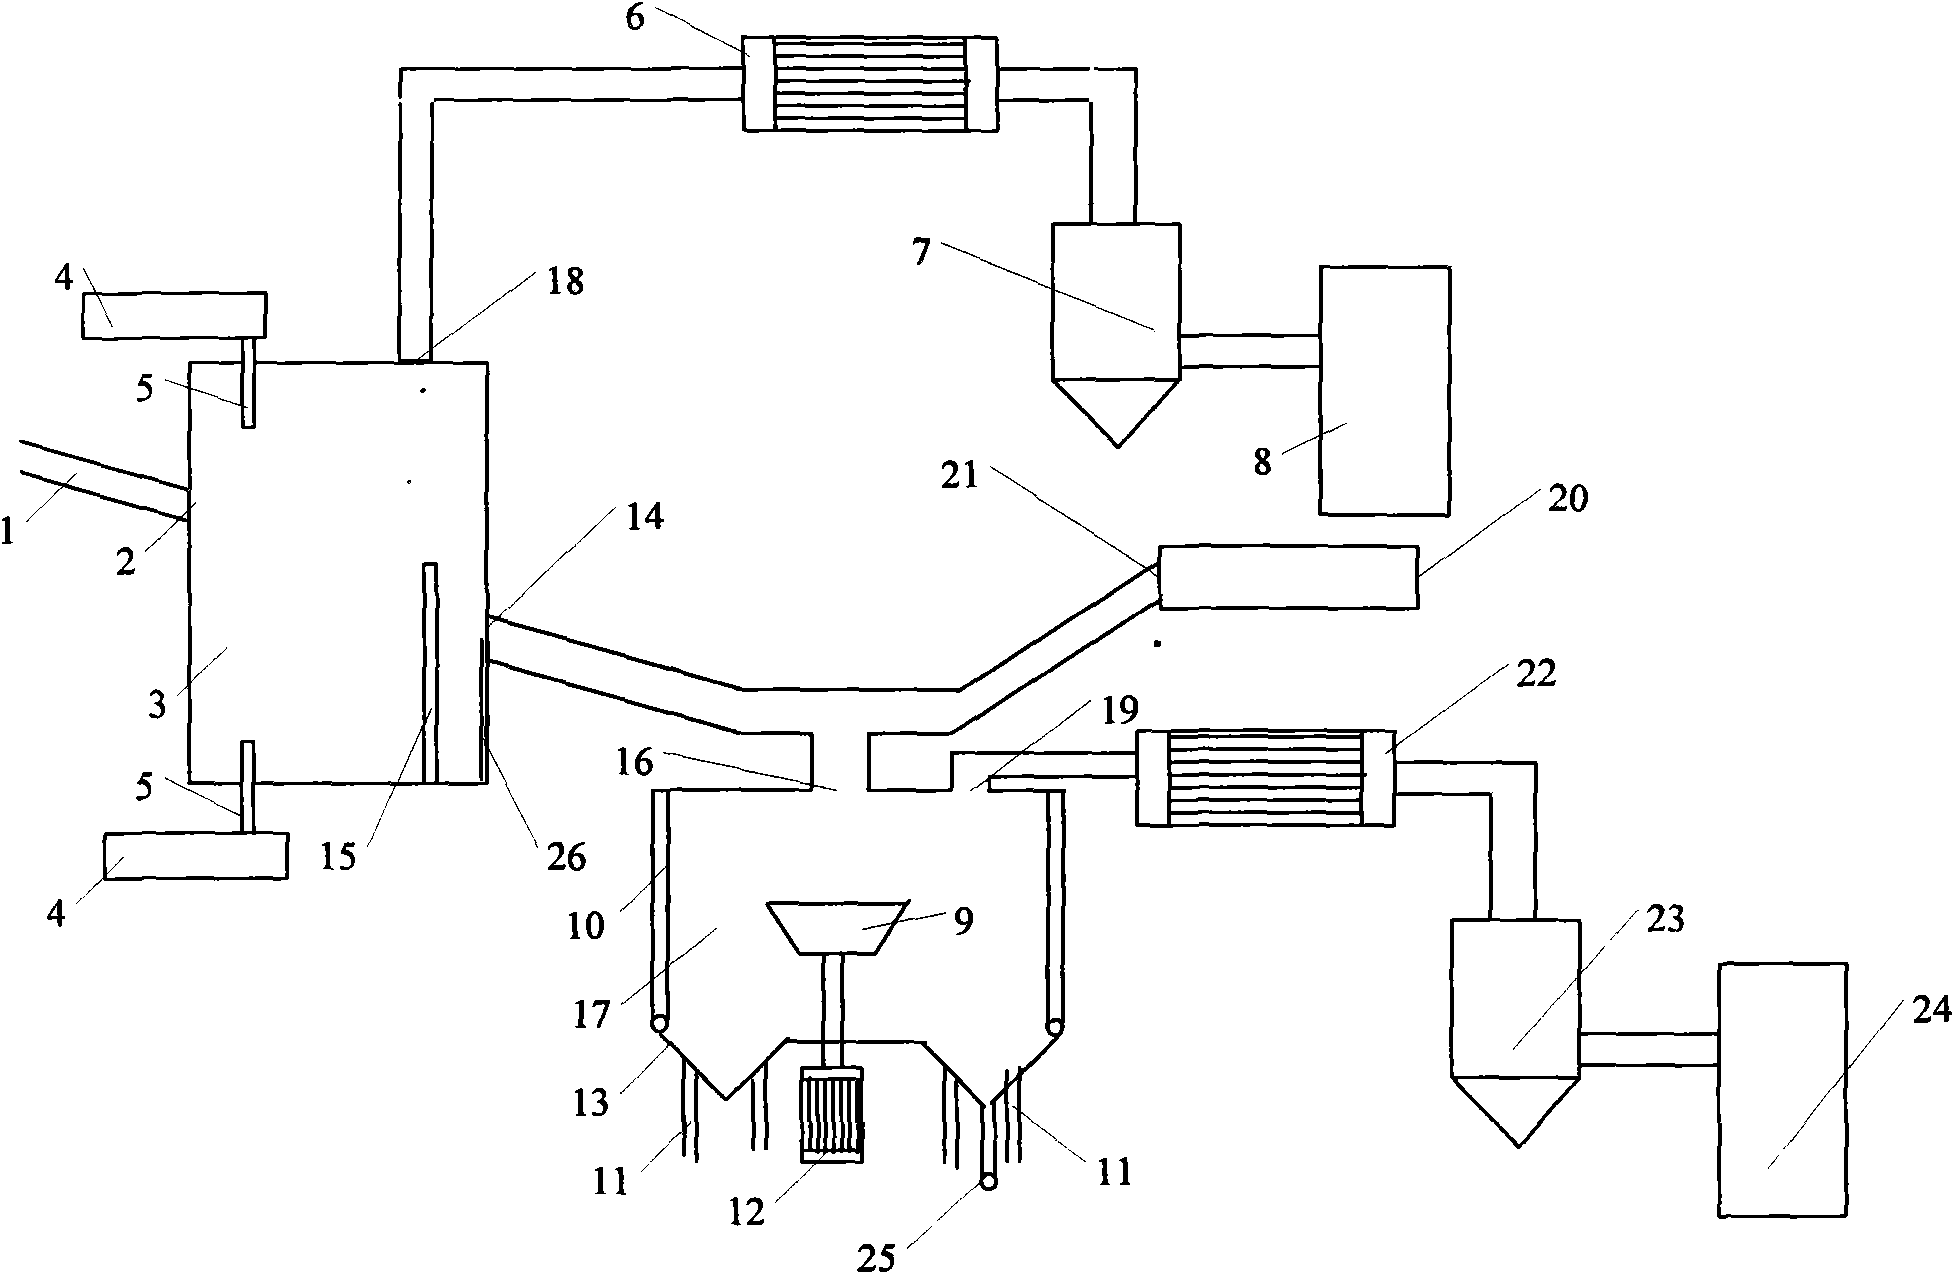 Compound coal gasification system and method of blast furnace slags